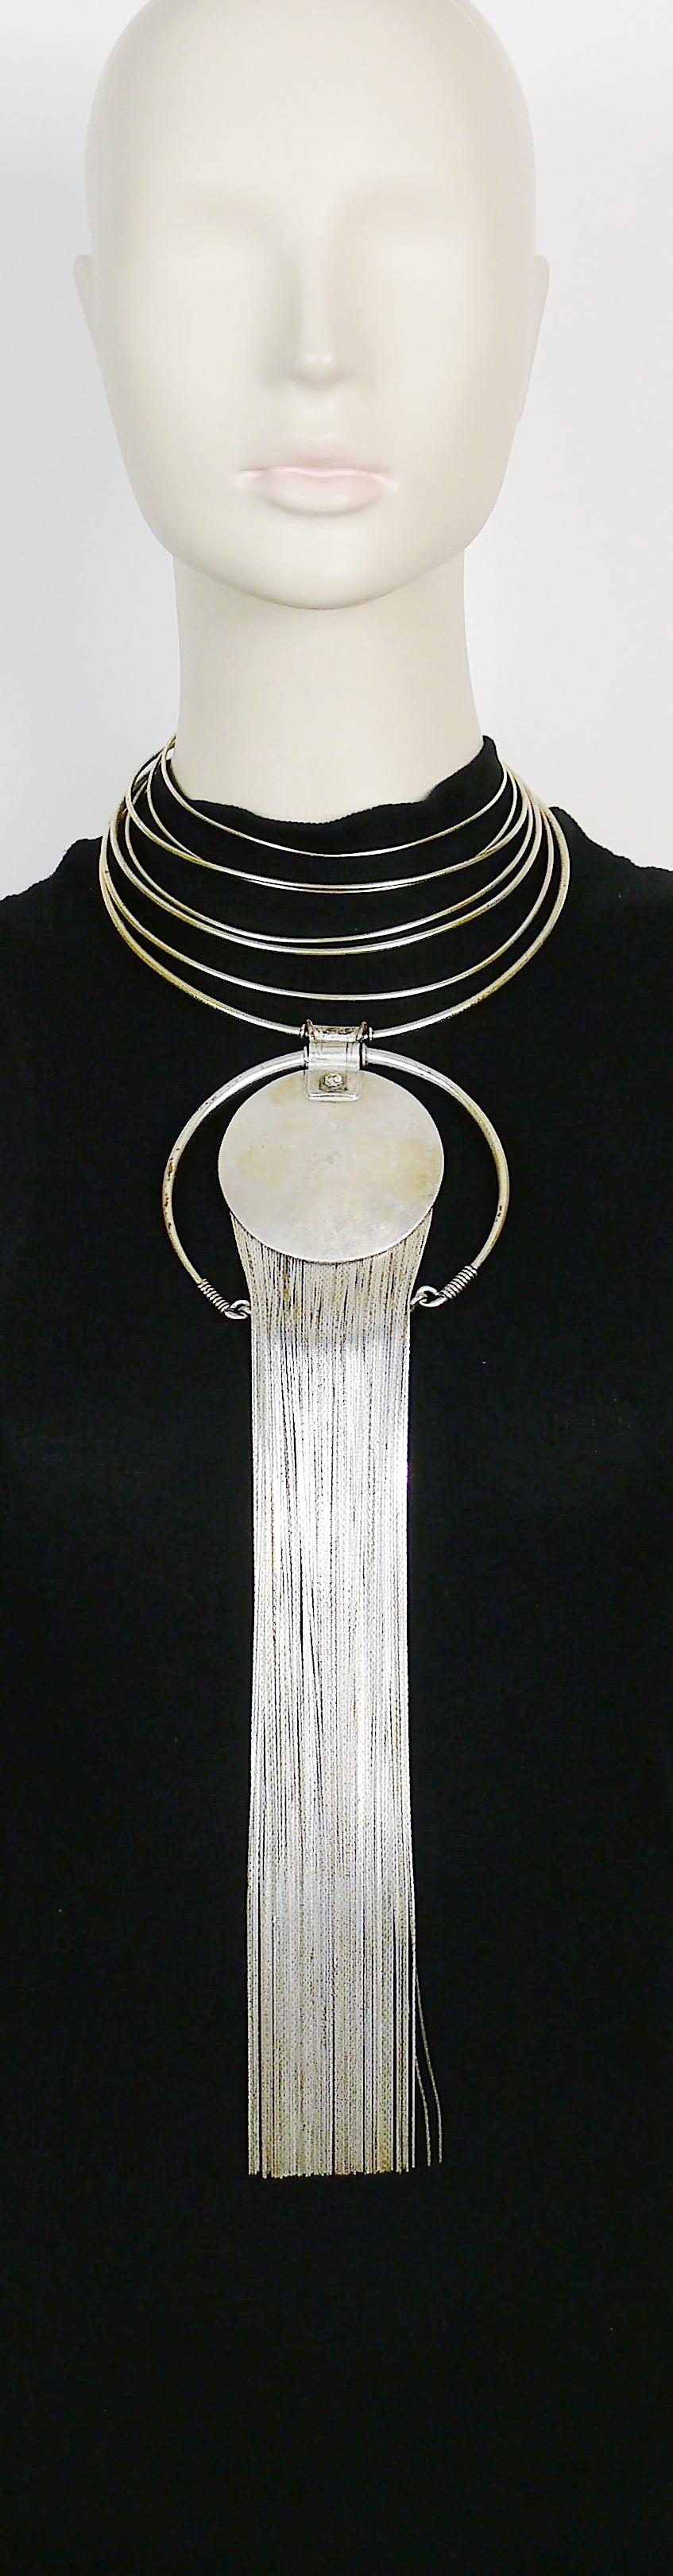 JEAN PAUL GAULTIER vintage silver toned wired torque necklace featuring an extra long fringed hammered disc pendant.

Marked GAULTIER.

Indicative measurements : torque will adapt to most of the neck sizes / pendant length (incl. fringes) approx. 33